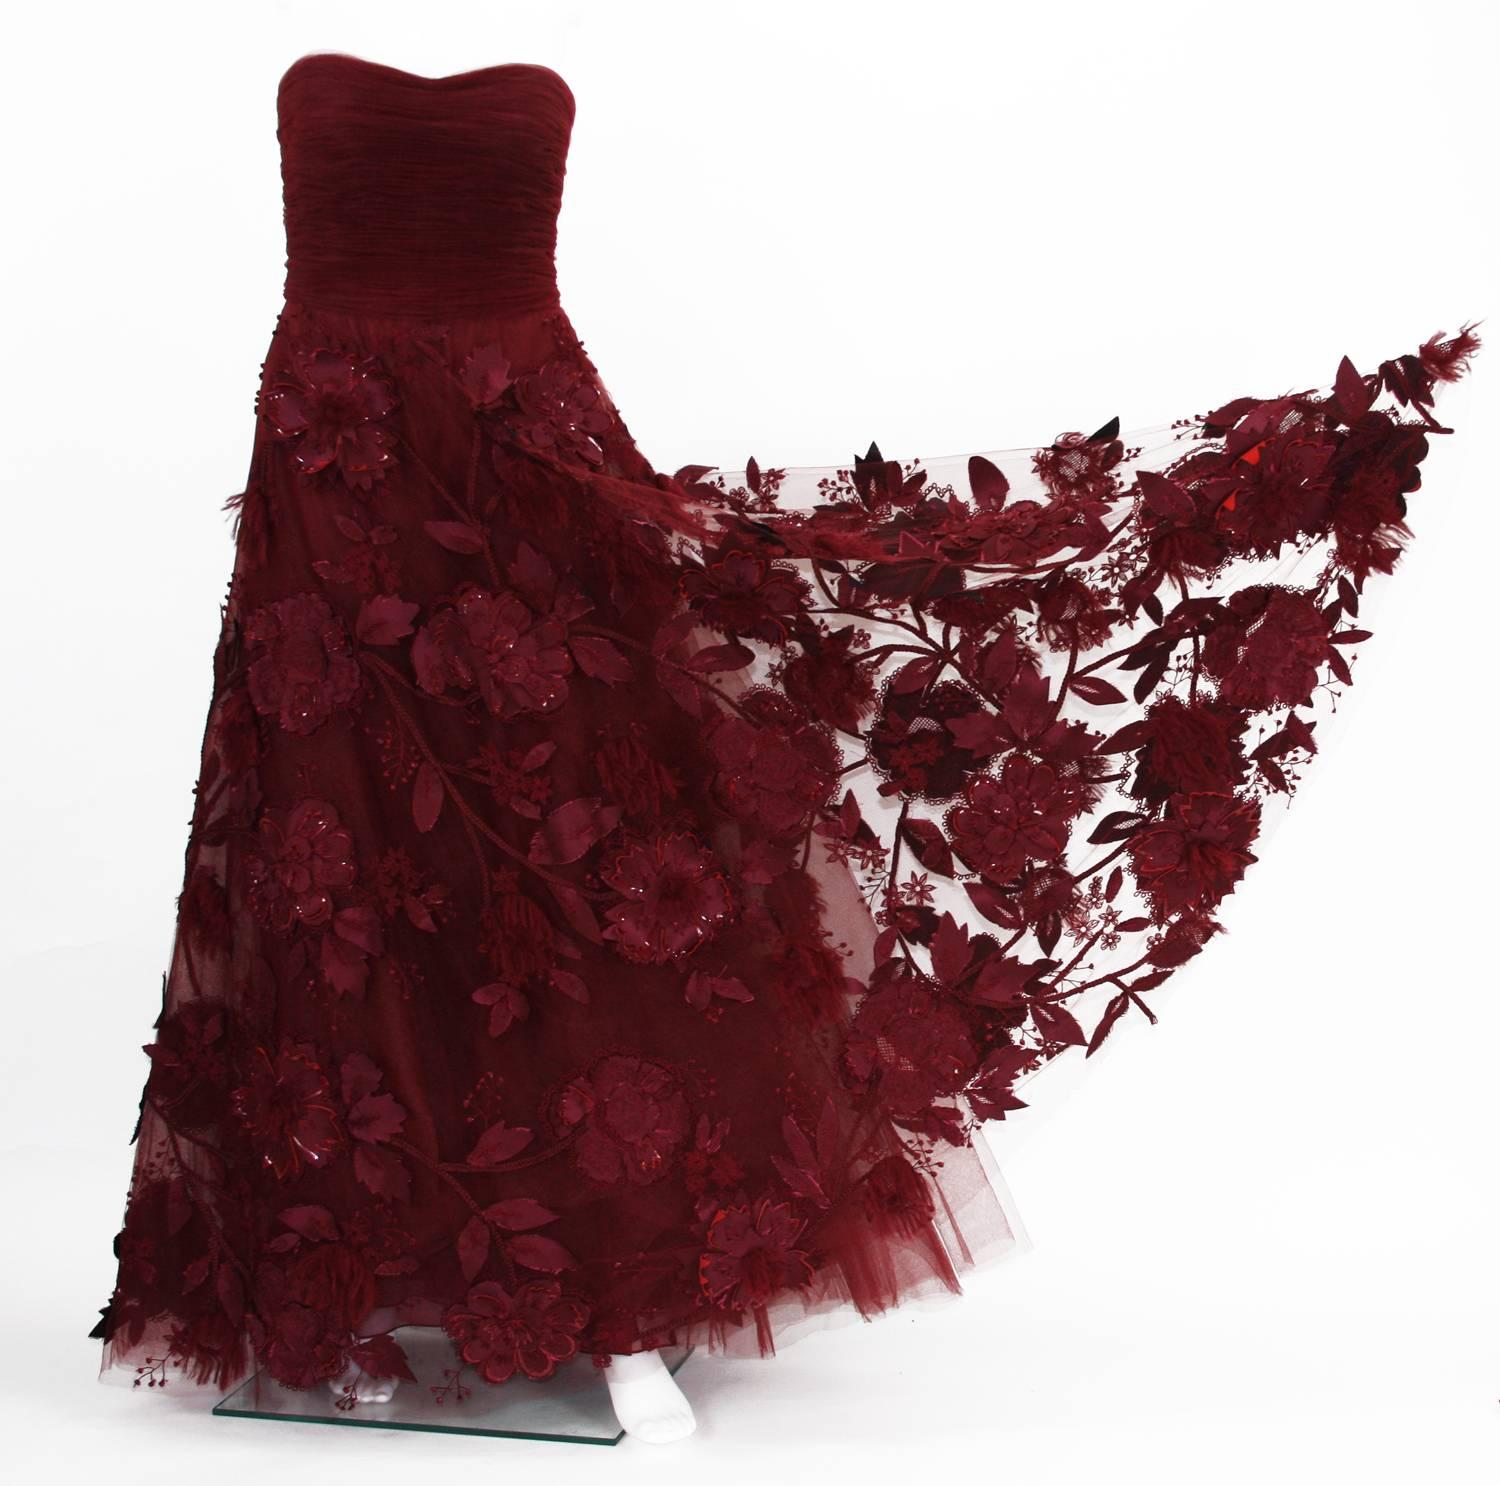 New Oscar de la Renta Corset Gown
US Size 8 (run small, better fit size 4)
Bordeaux Color
Tulle, Patent Leather, 3D Floral Embellishment, Embroidered.
Layered Skirt, Silk Lining, Corset at Interior.
Measurements: Length - 54 inches (from the top of